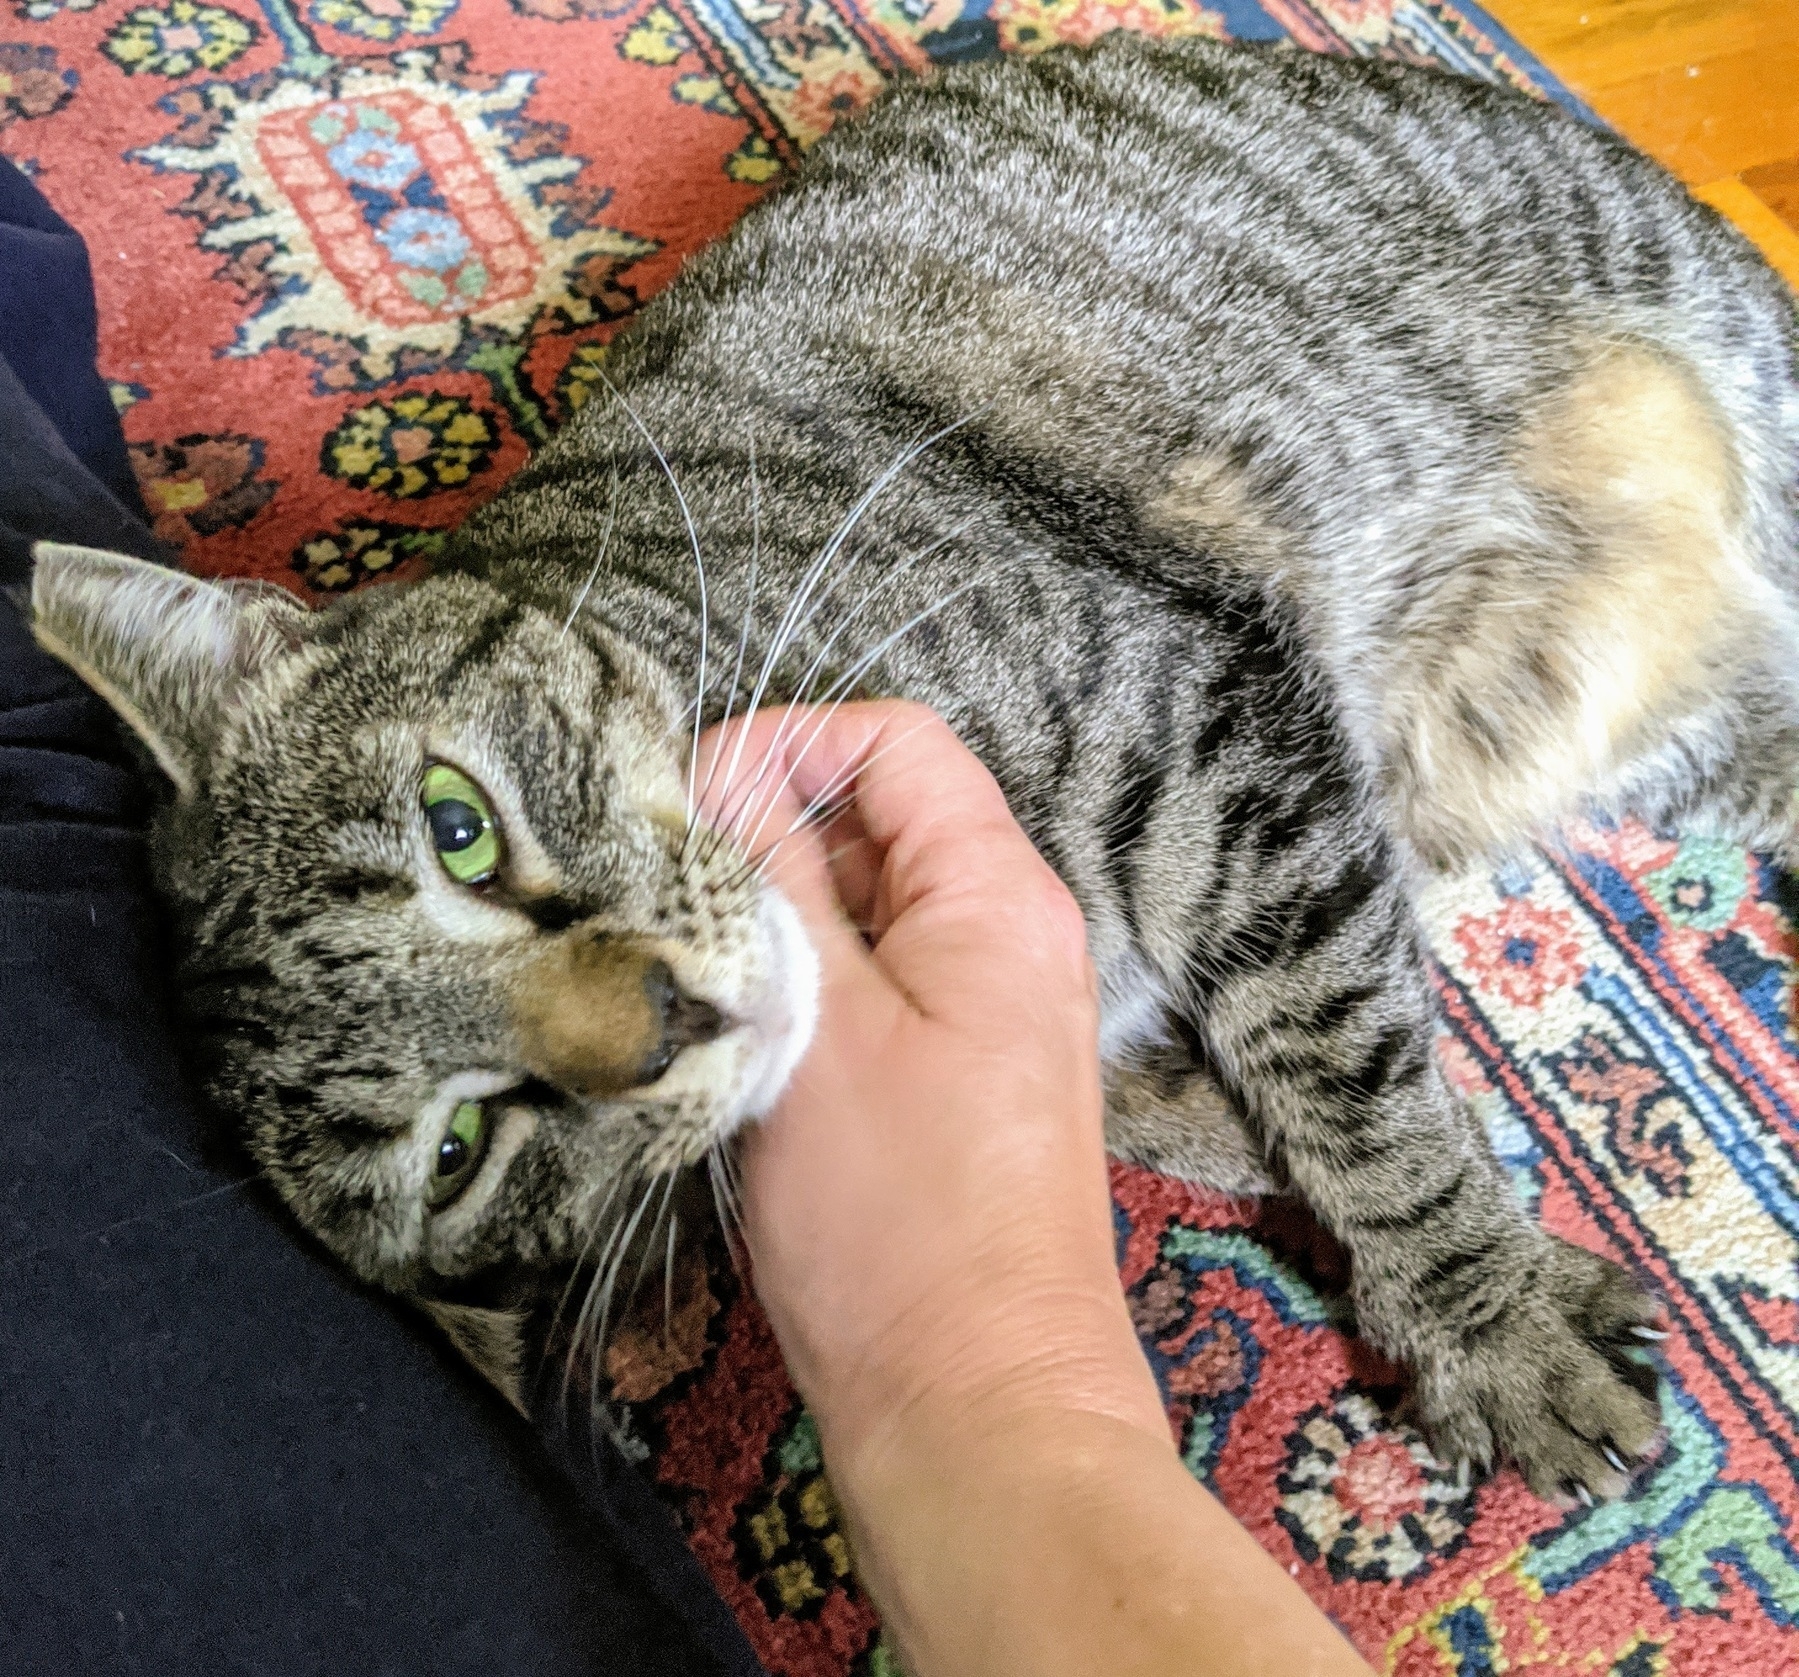 the handsomest stripey cat in the world gets cuddled